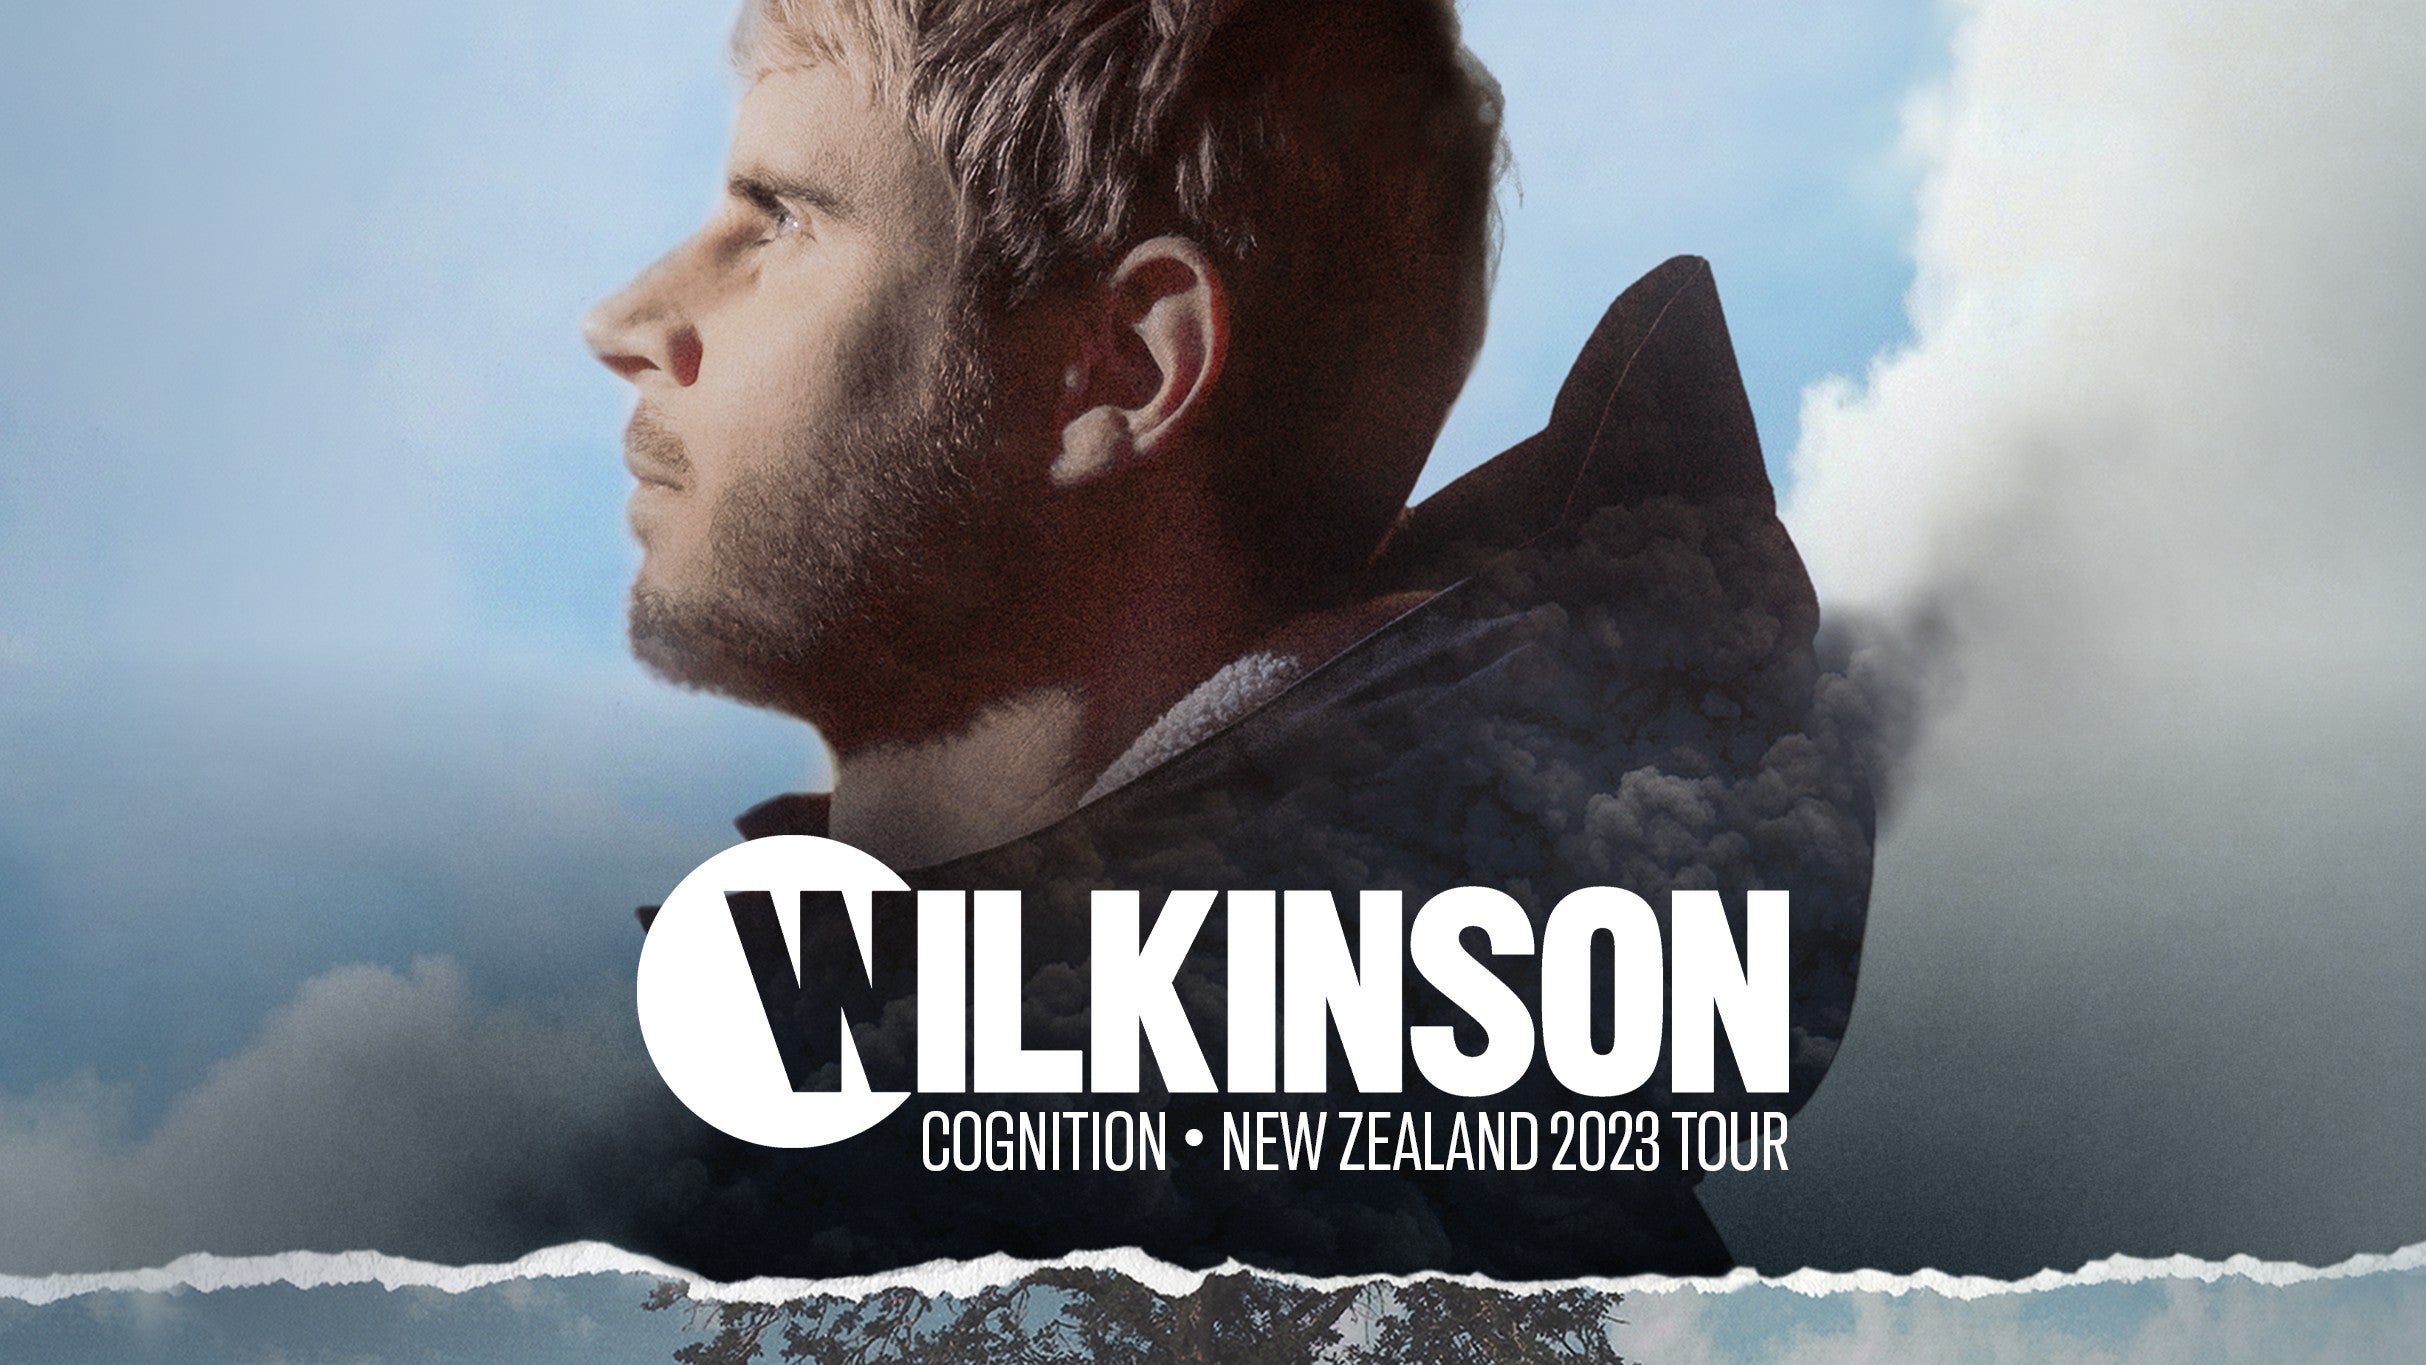 Image used with permission from Ticketmaster | Wilkinson presents COGNITION NZ TOUR tickets